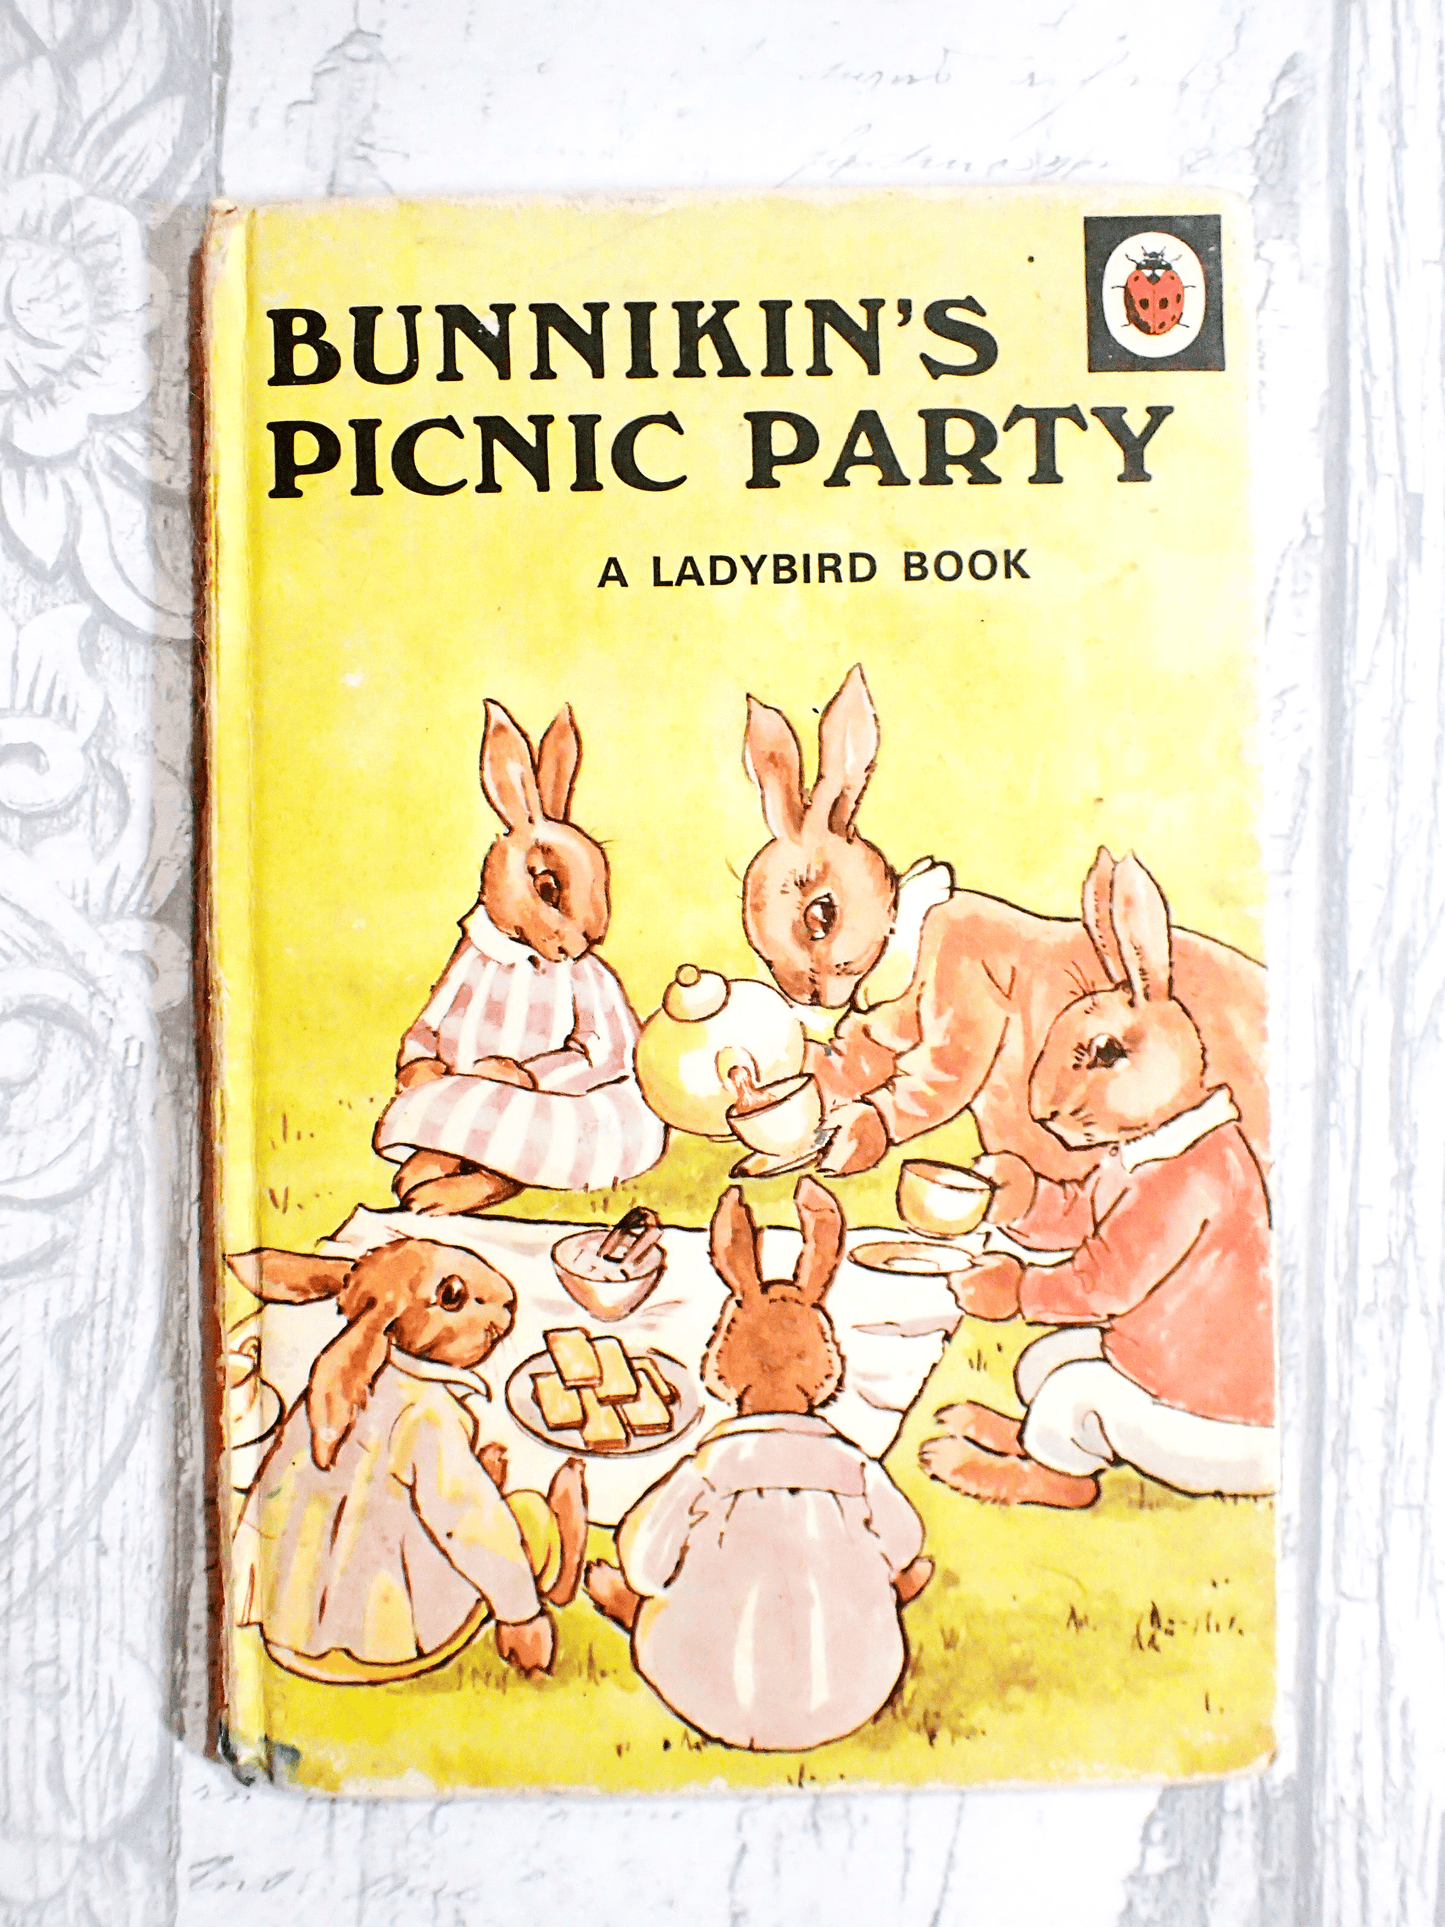 Vintage Children's Book Well Loved tales with cute bunnies on the cover having a birthday party. 